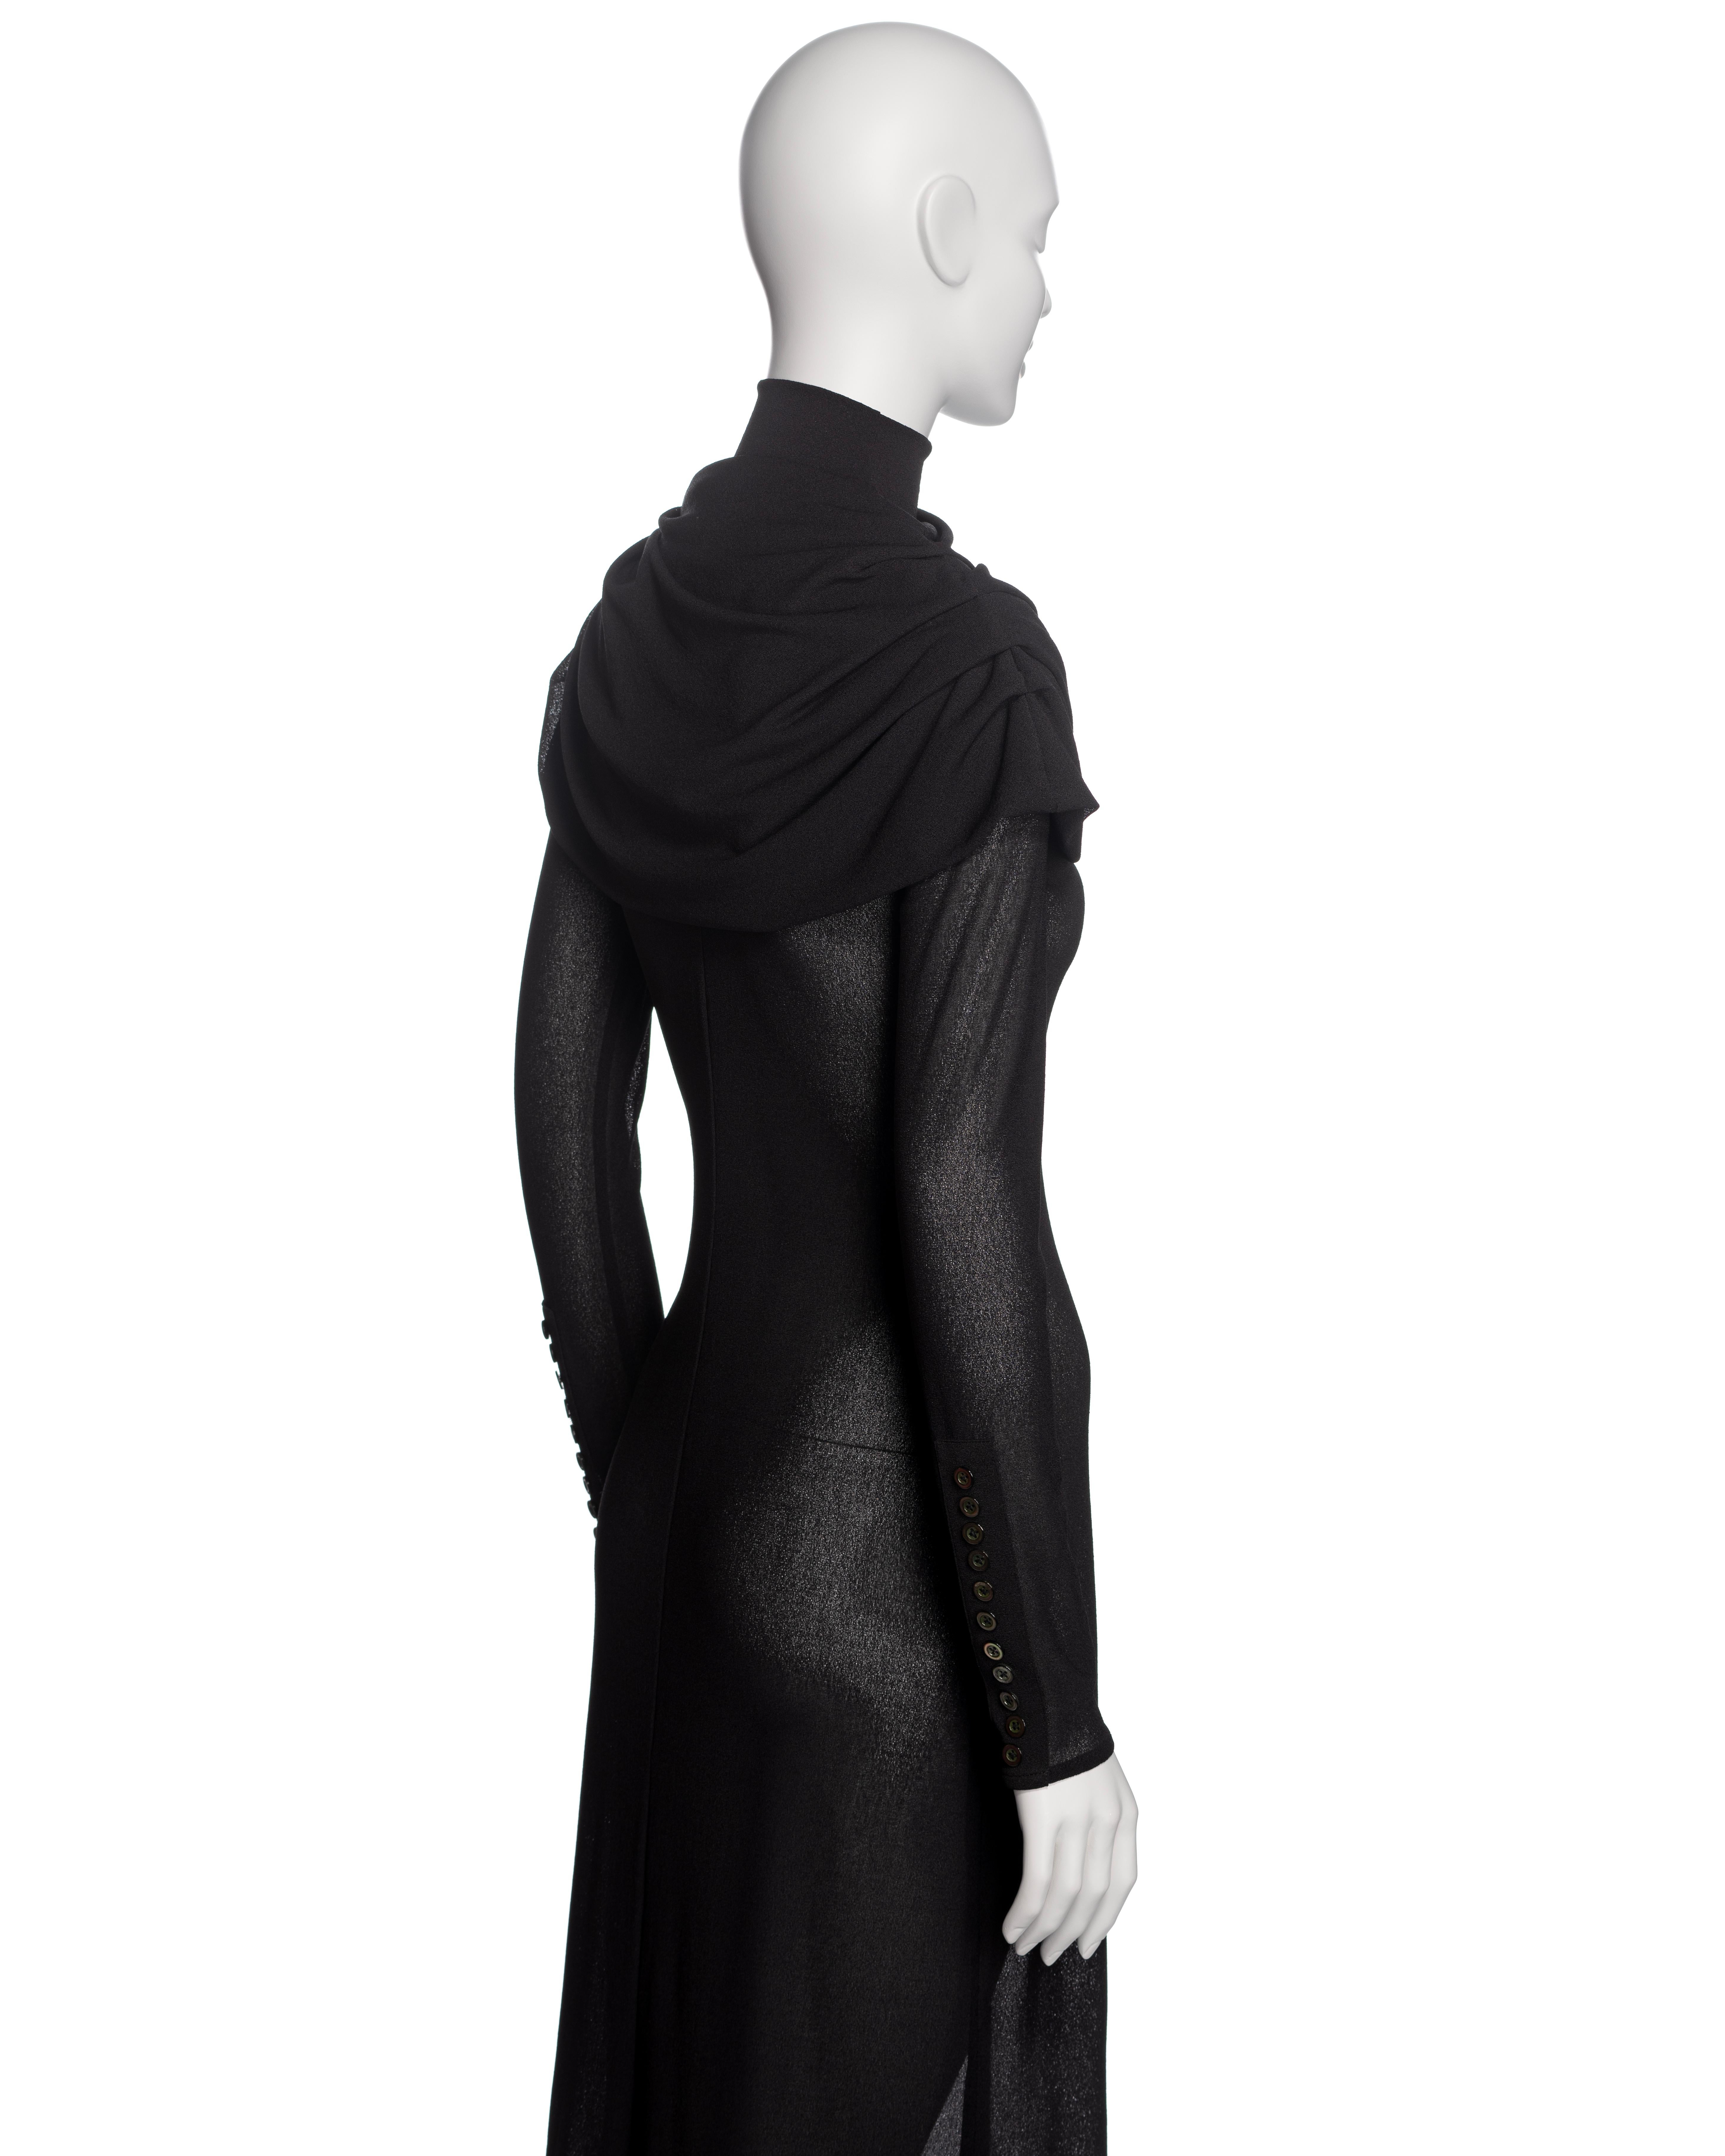 Alexander McQueen Black Mock Neck Evening Dress with Draped Cowl, 'Joan' FW 1998 For Sale 5